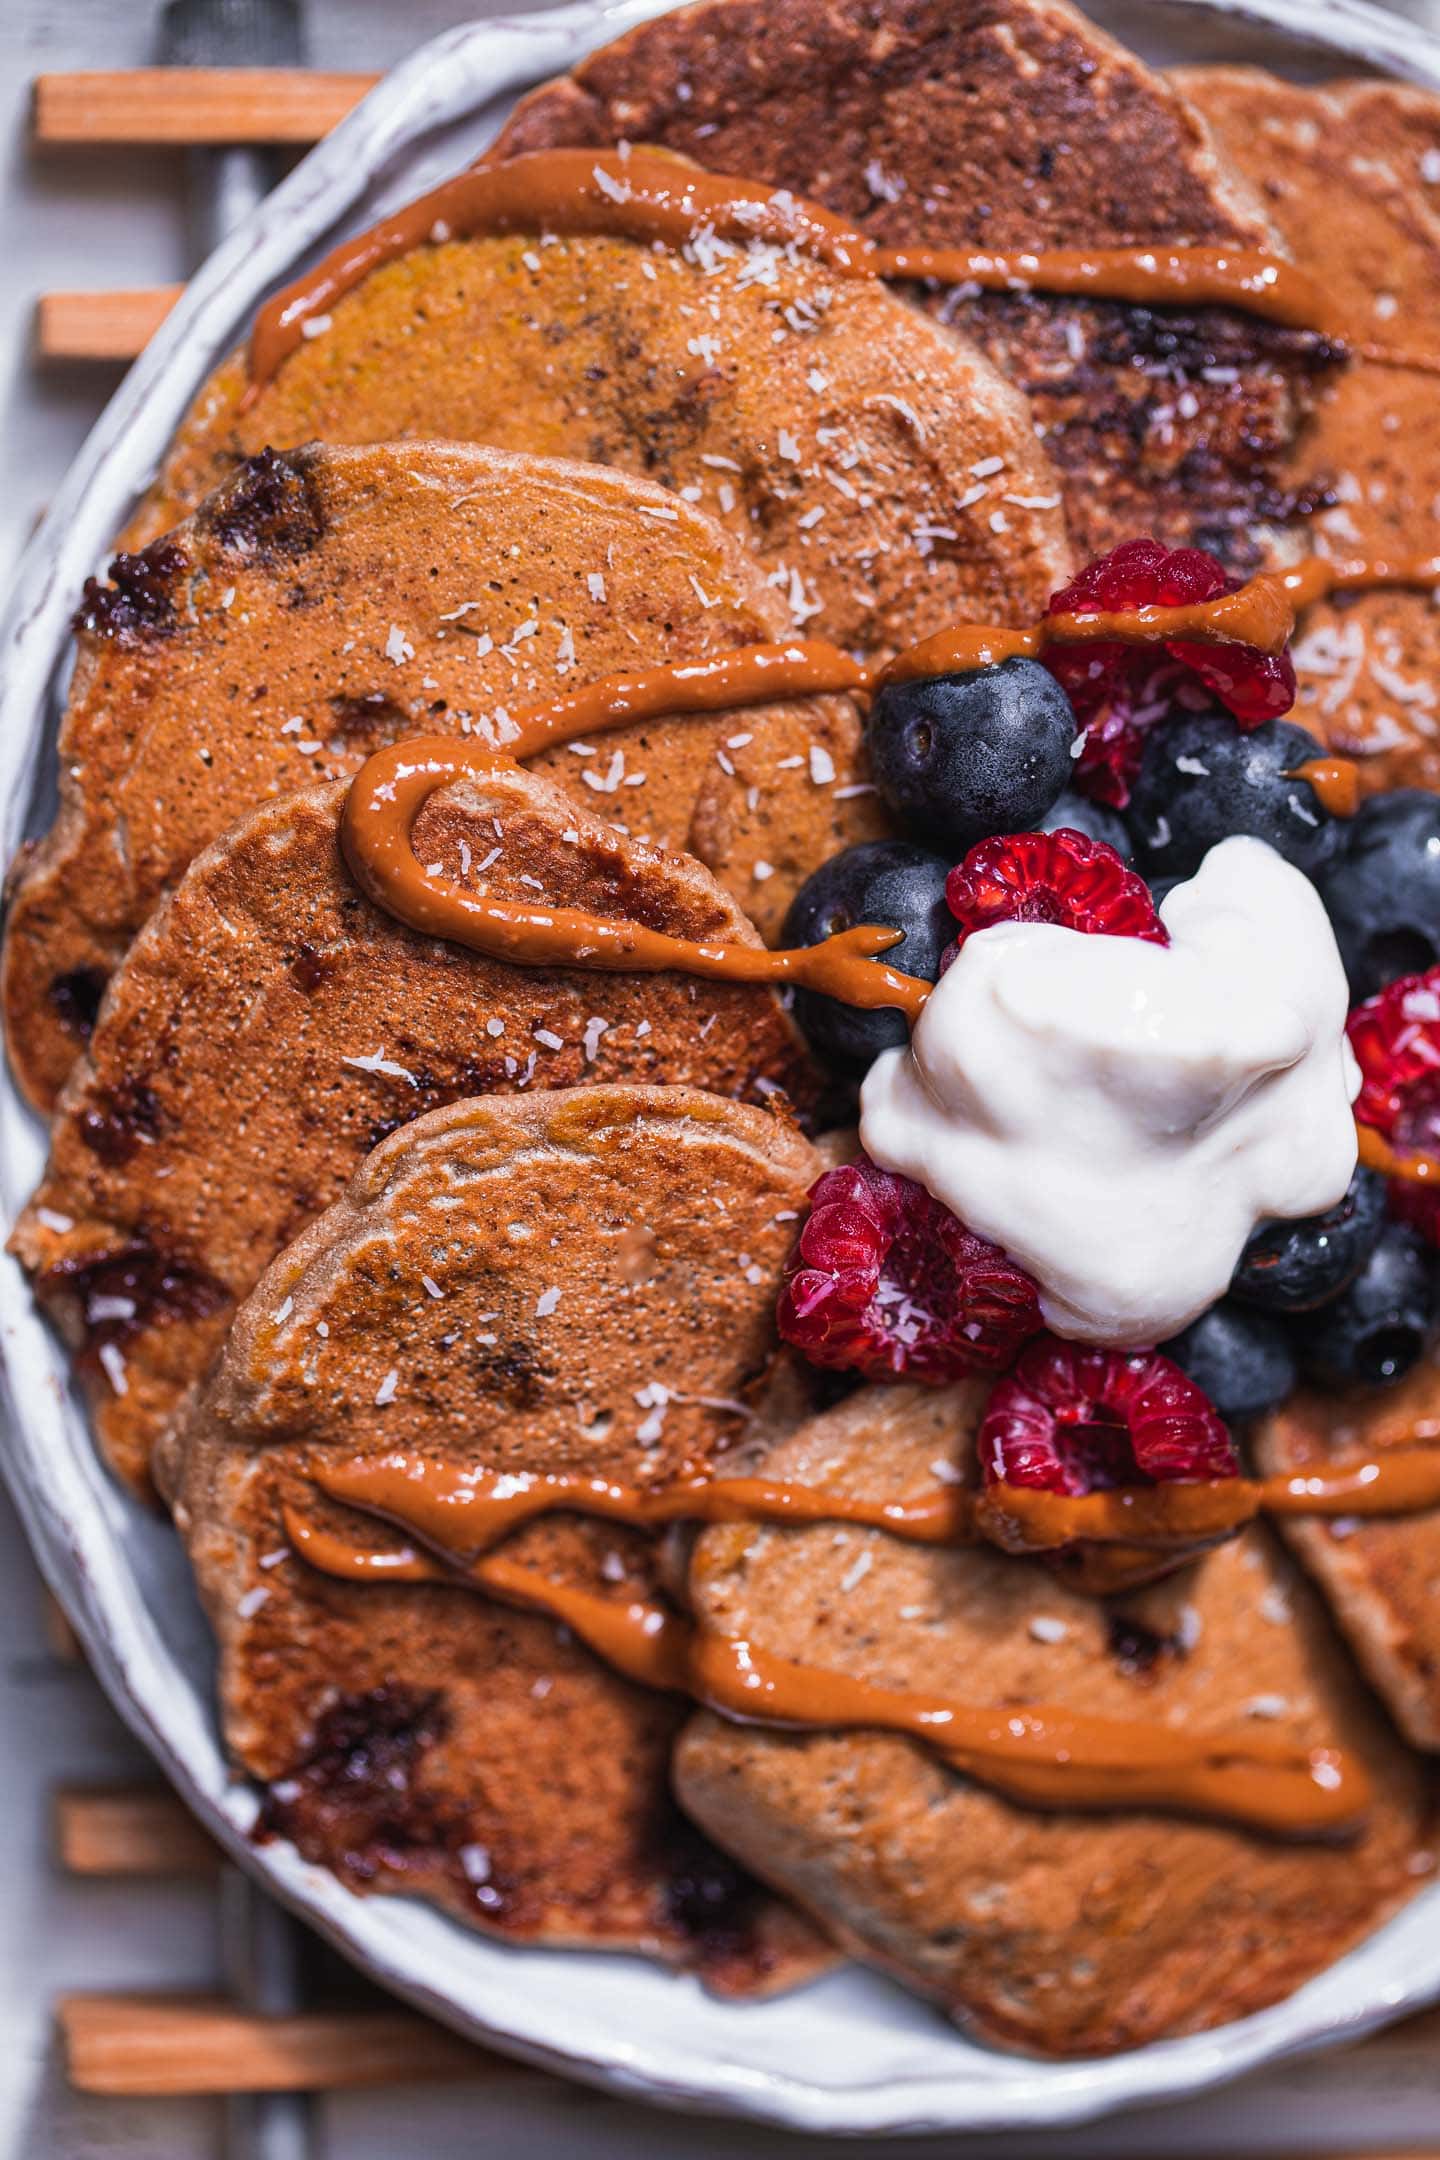 Closeup of a plate with chocolate chip pancakes and berries